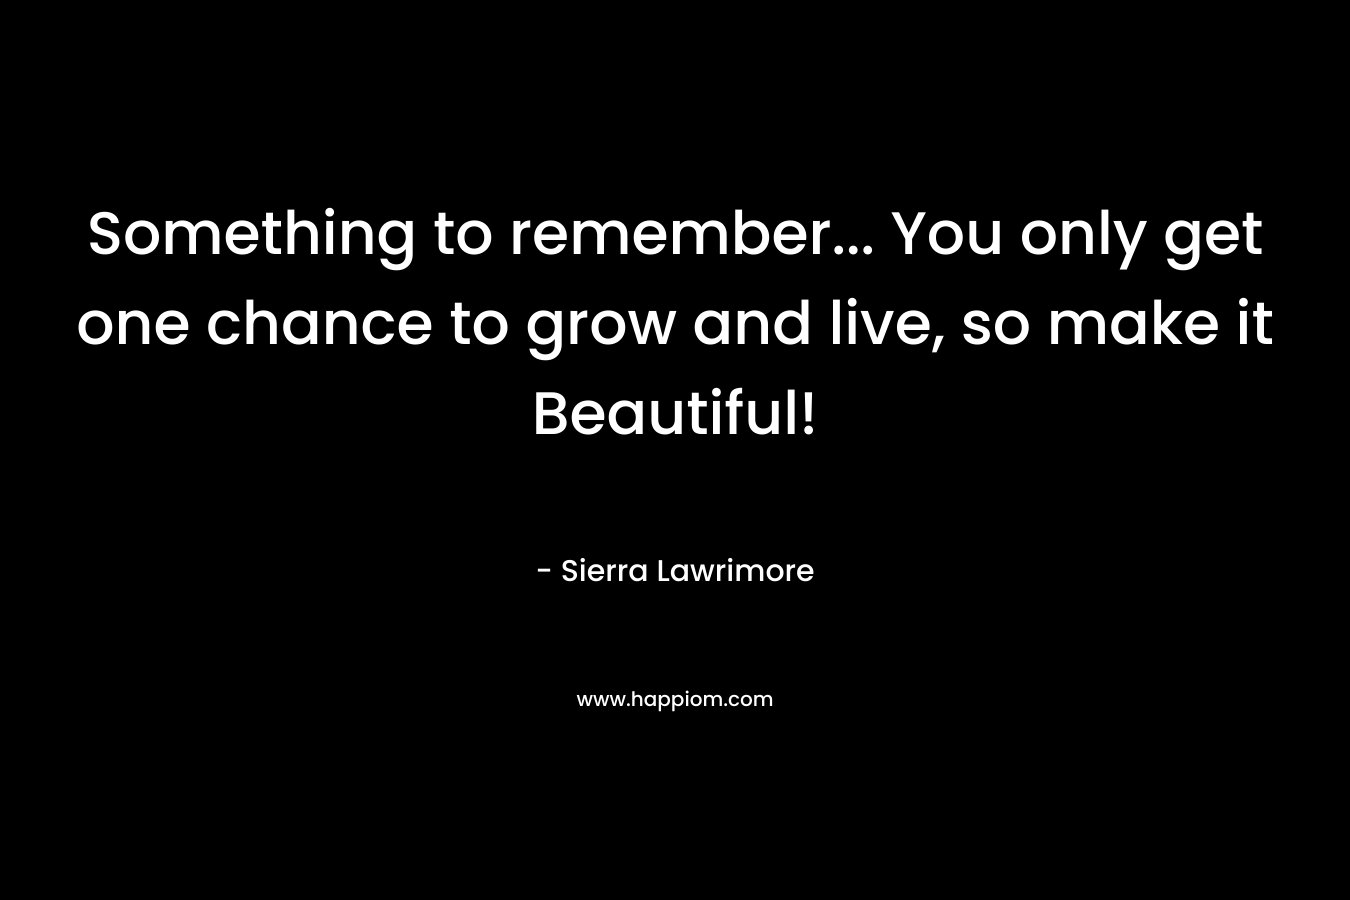 Something to remember... You only get one chance to grow and live, so make it Beautiful!